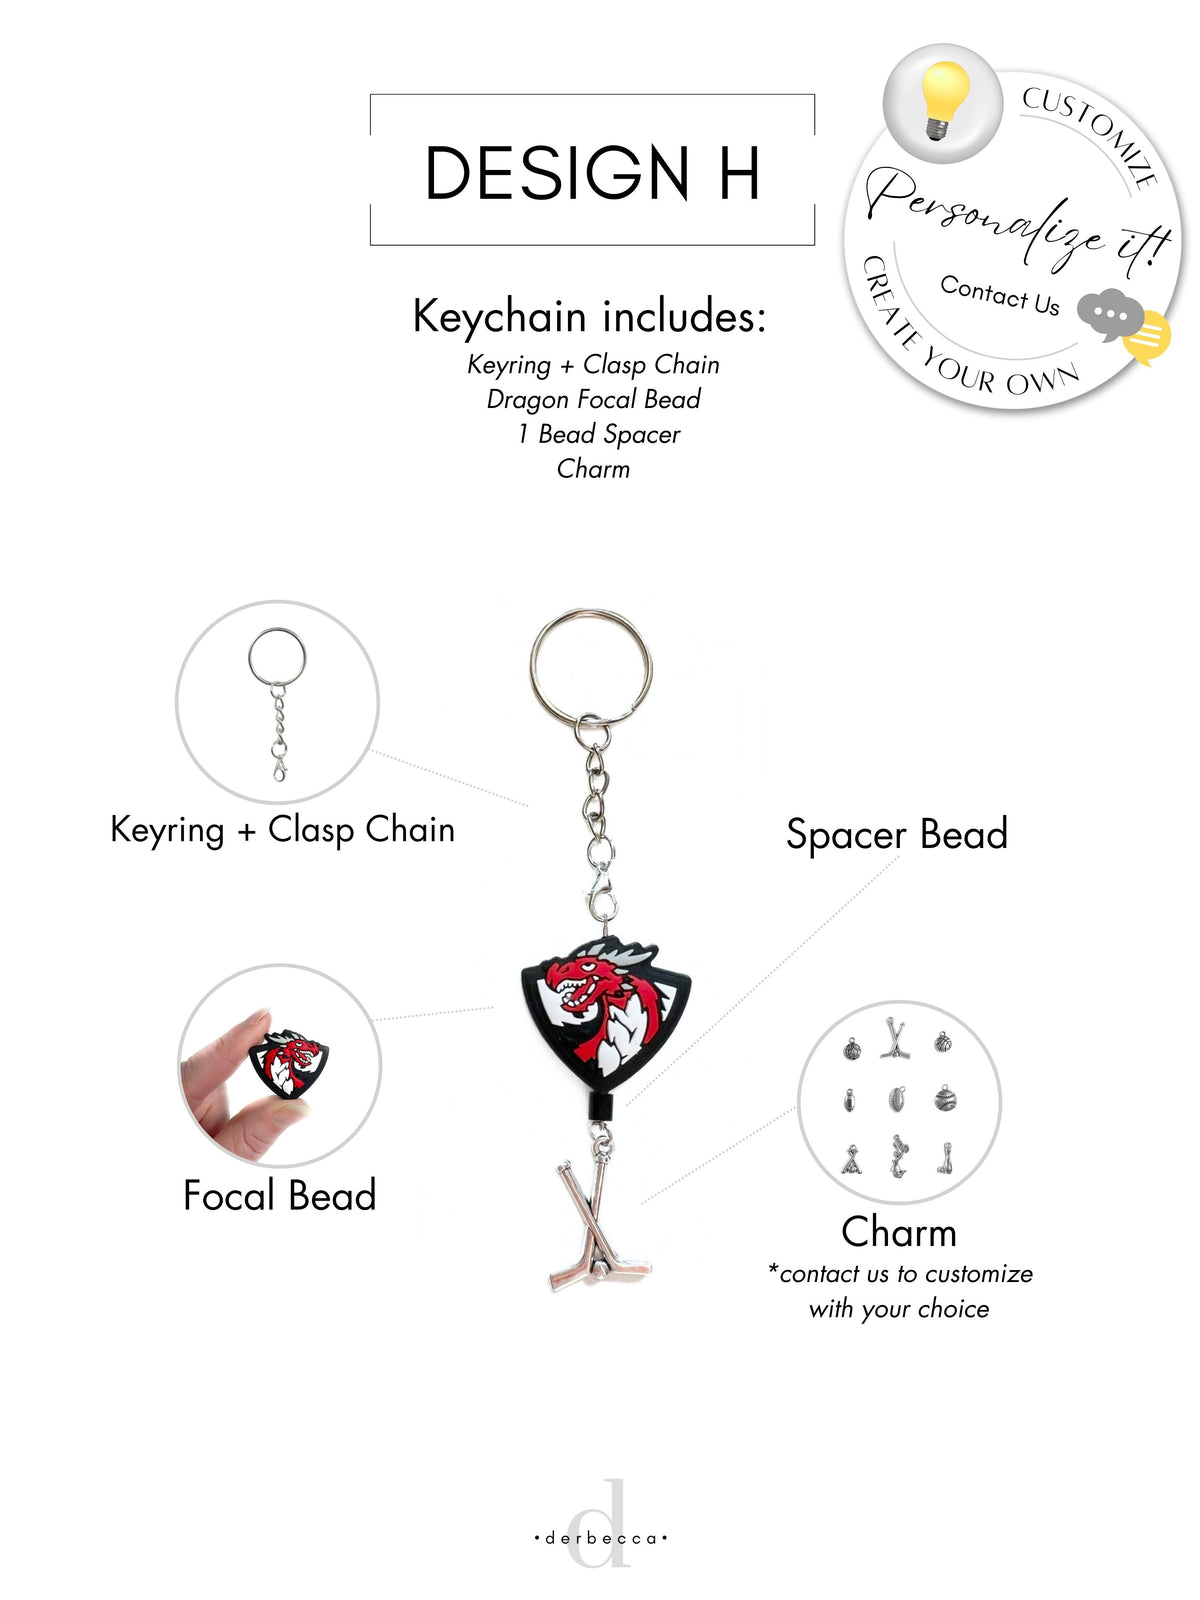 Keychain with Keyring + Clasp Chain Dragon Focal Bead  1 Bead Spacer Hockey Charm Silicone Accessory